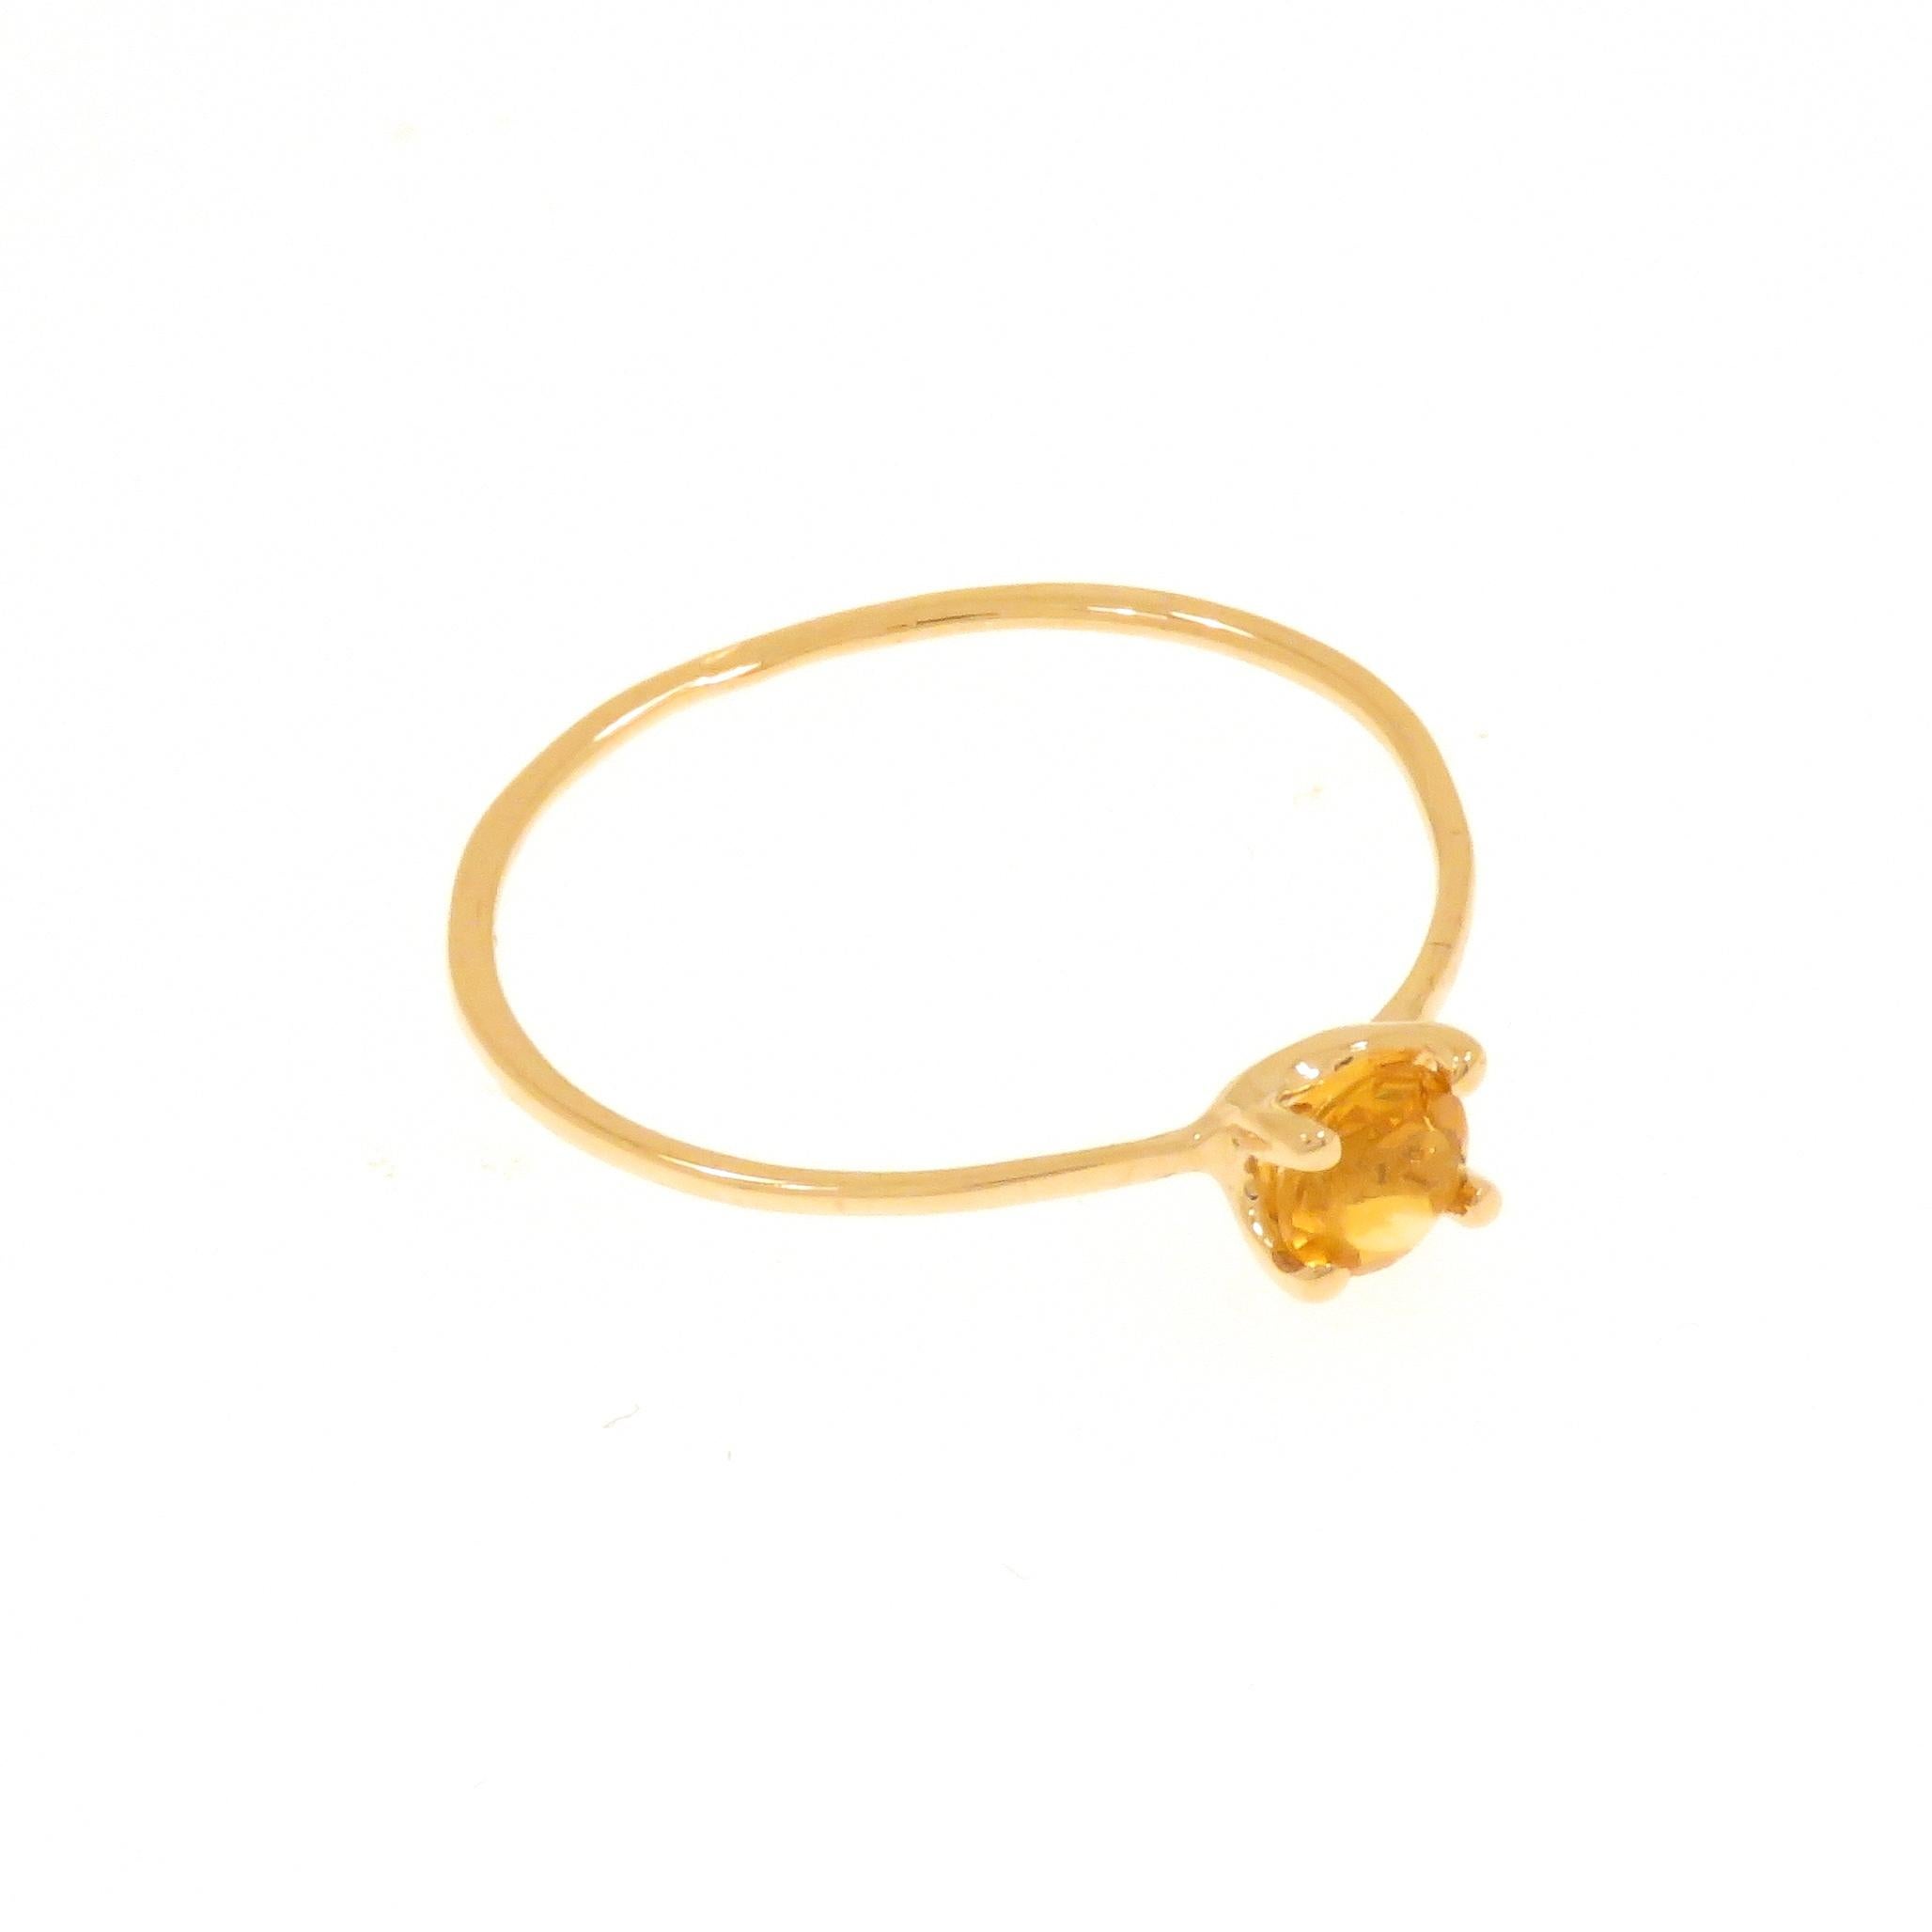 Brilliant Cut Citrine 9 Karat Rose Gold Ring Handcrafted in Italy For Sale 1